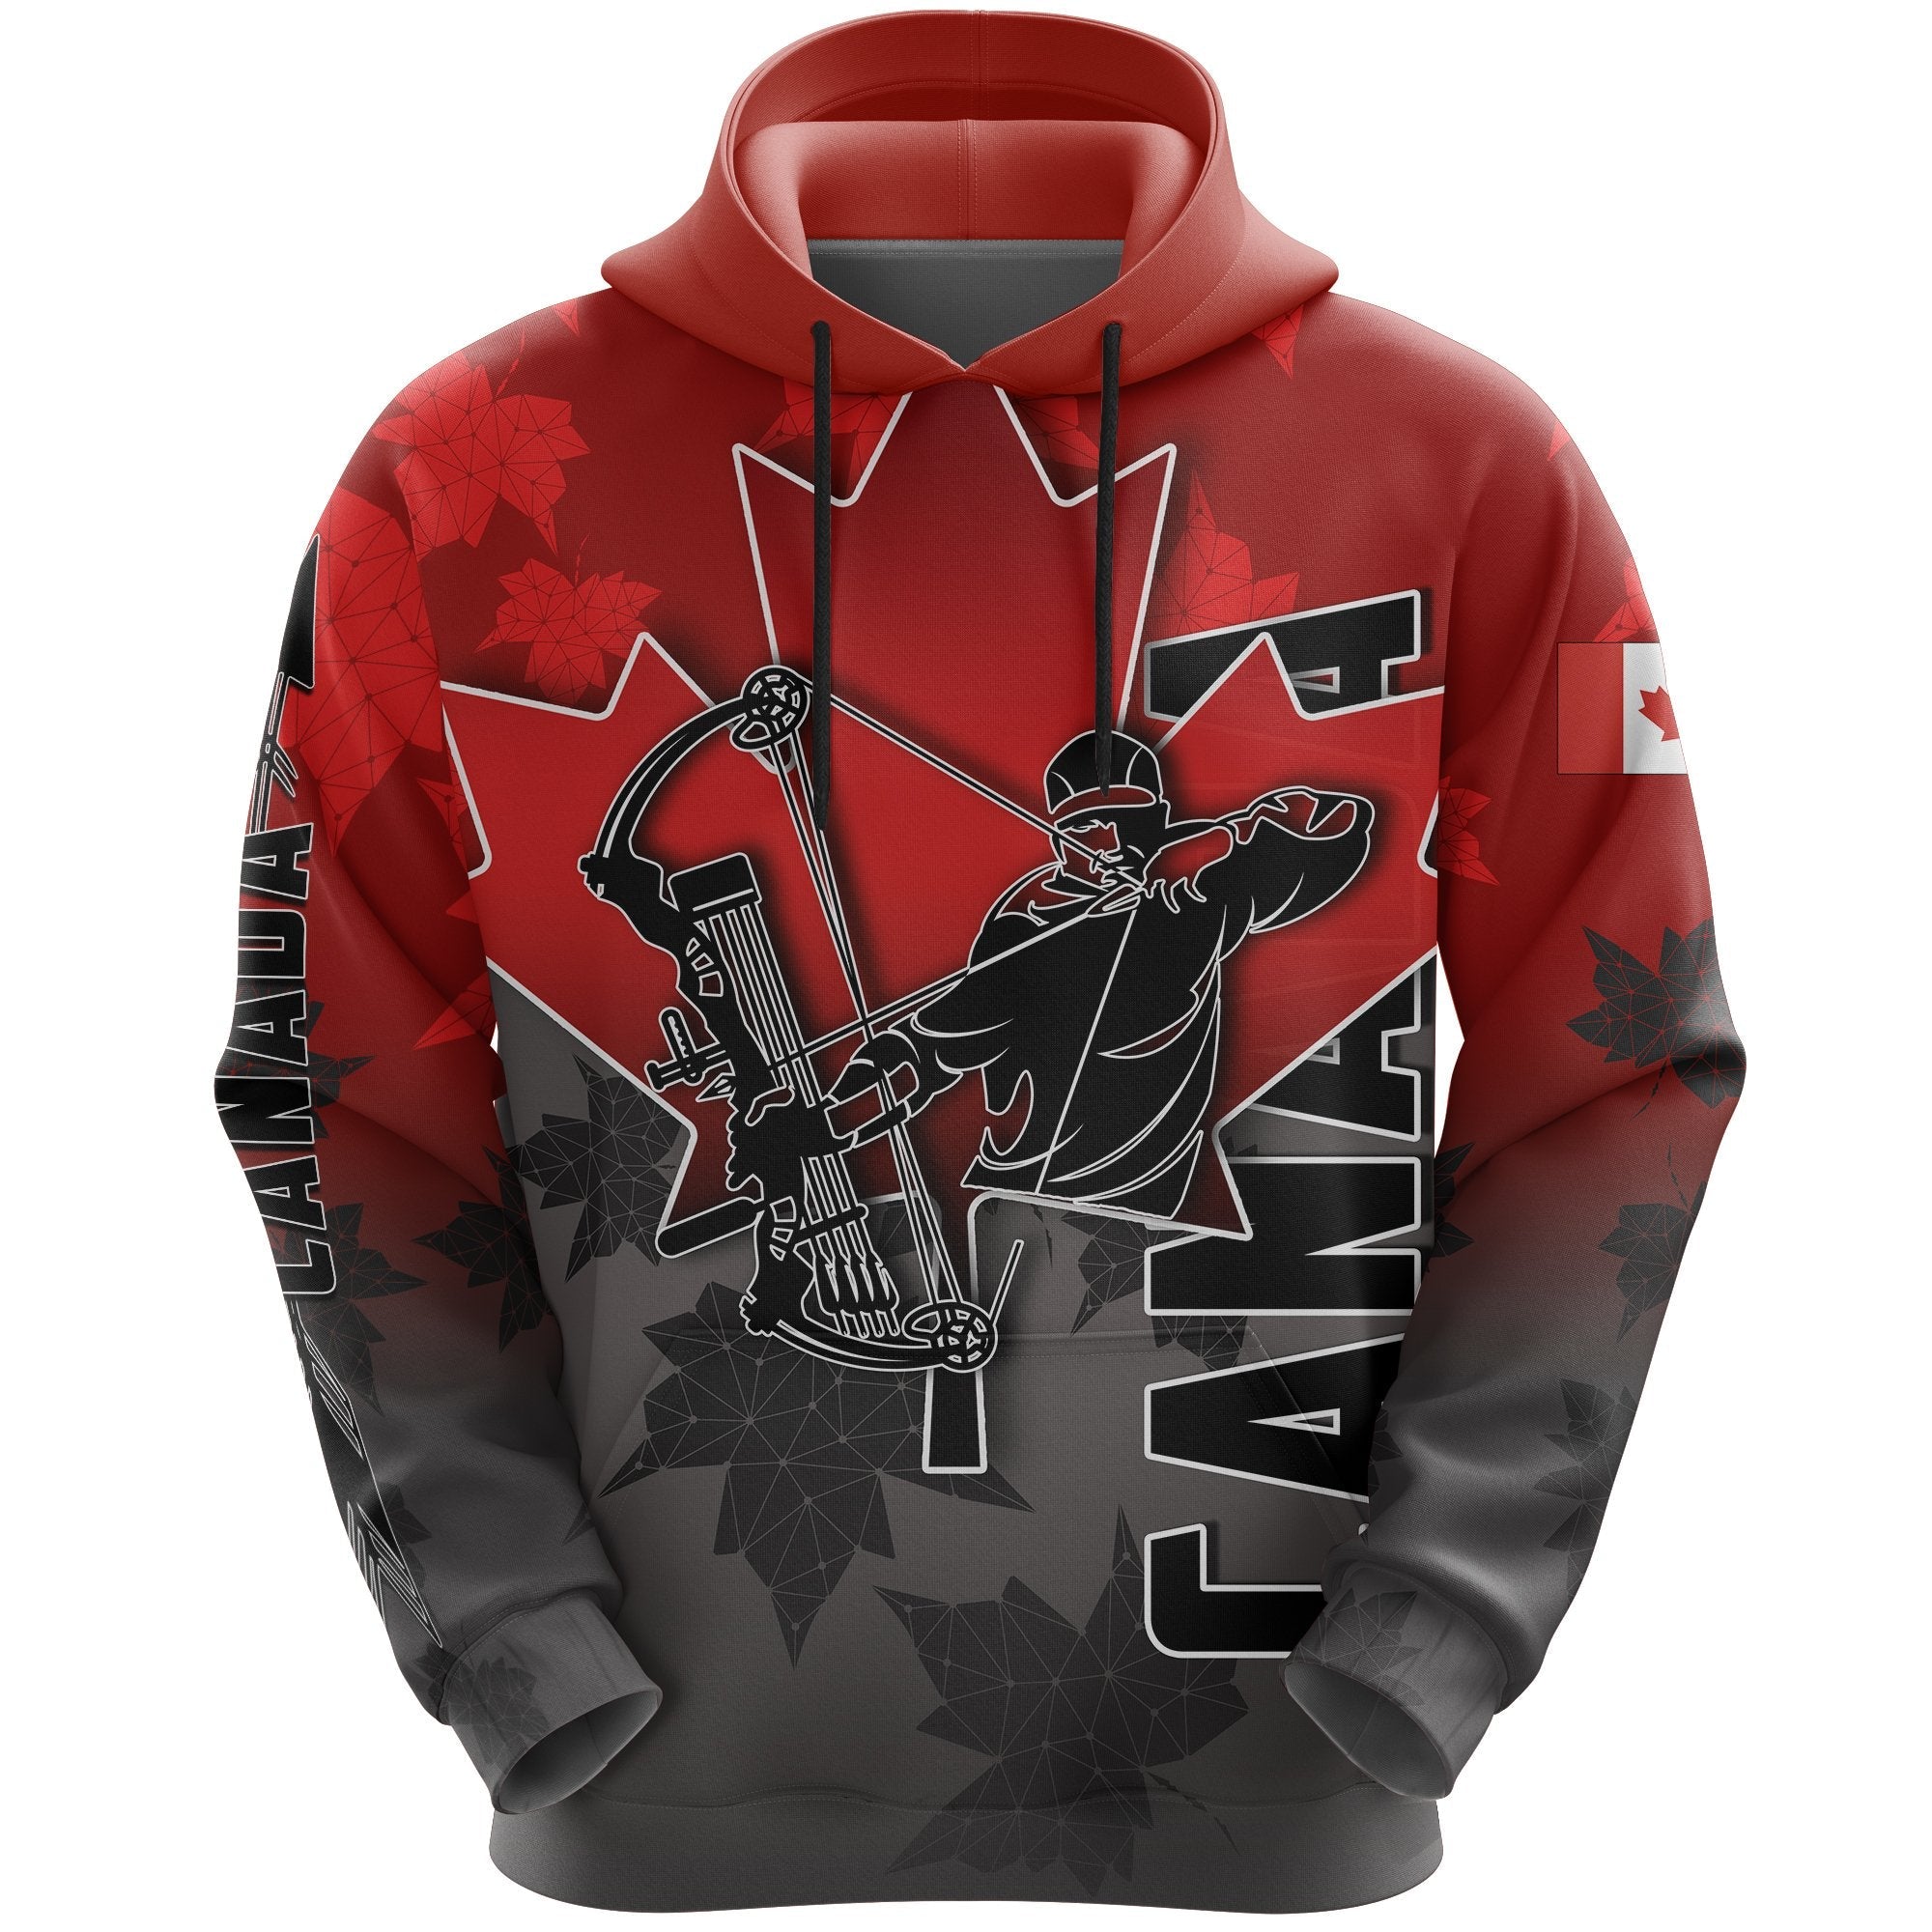 canada-all-over-hoodie-archery-with-maple-leaf